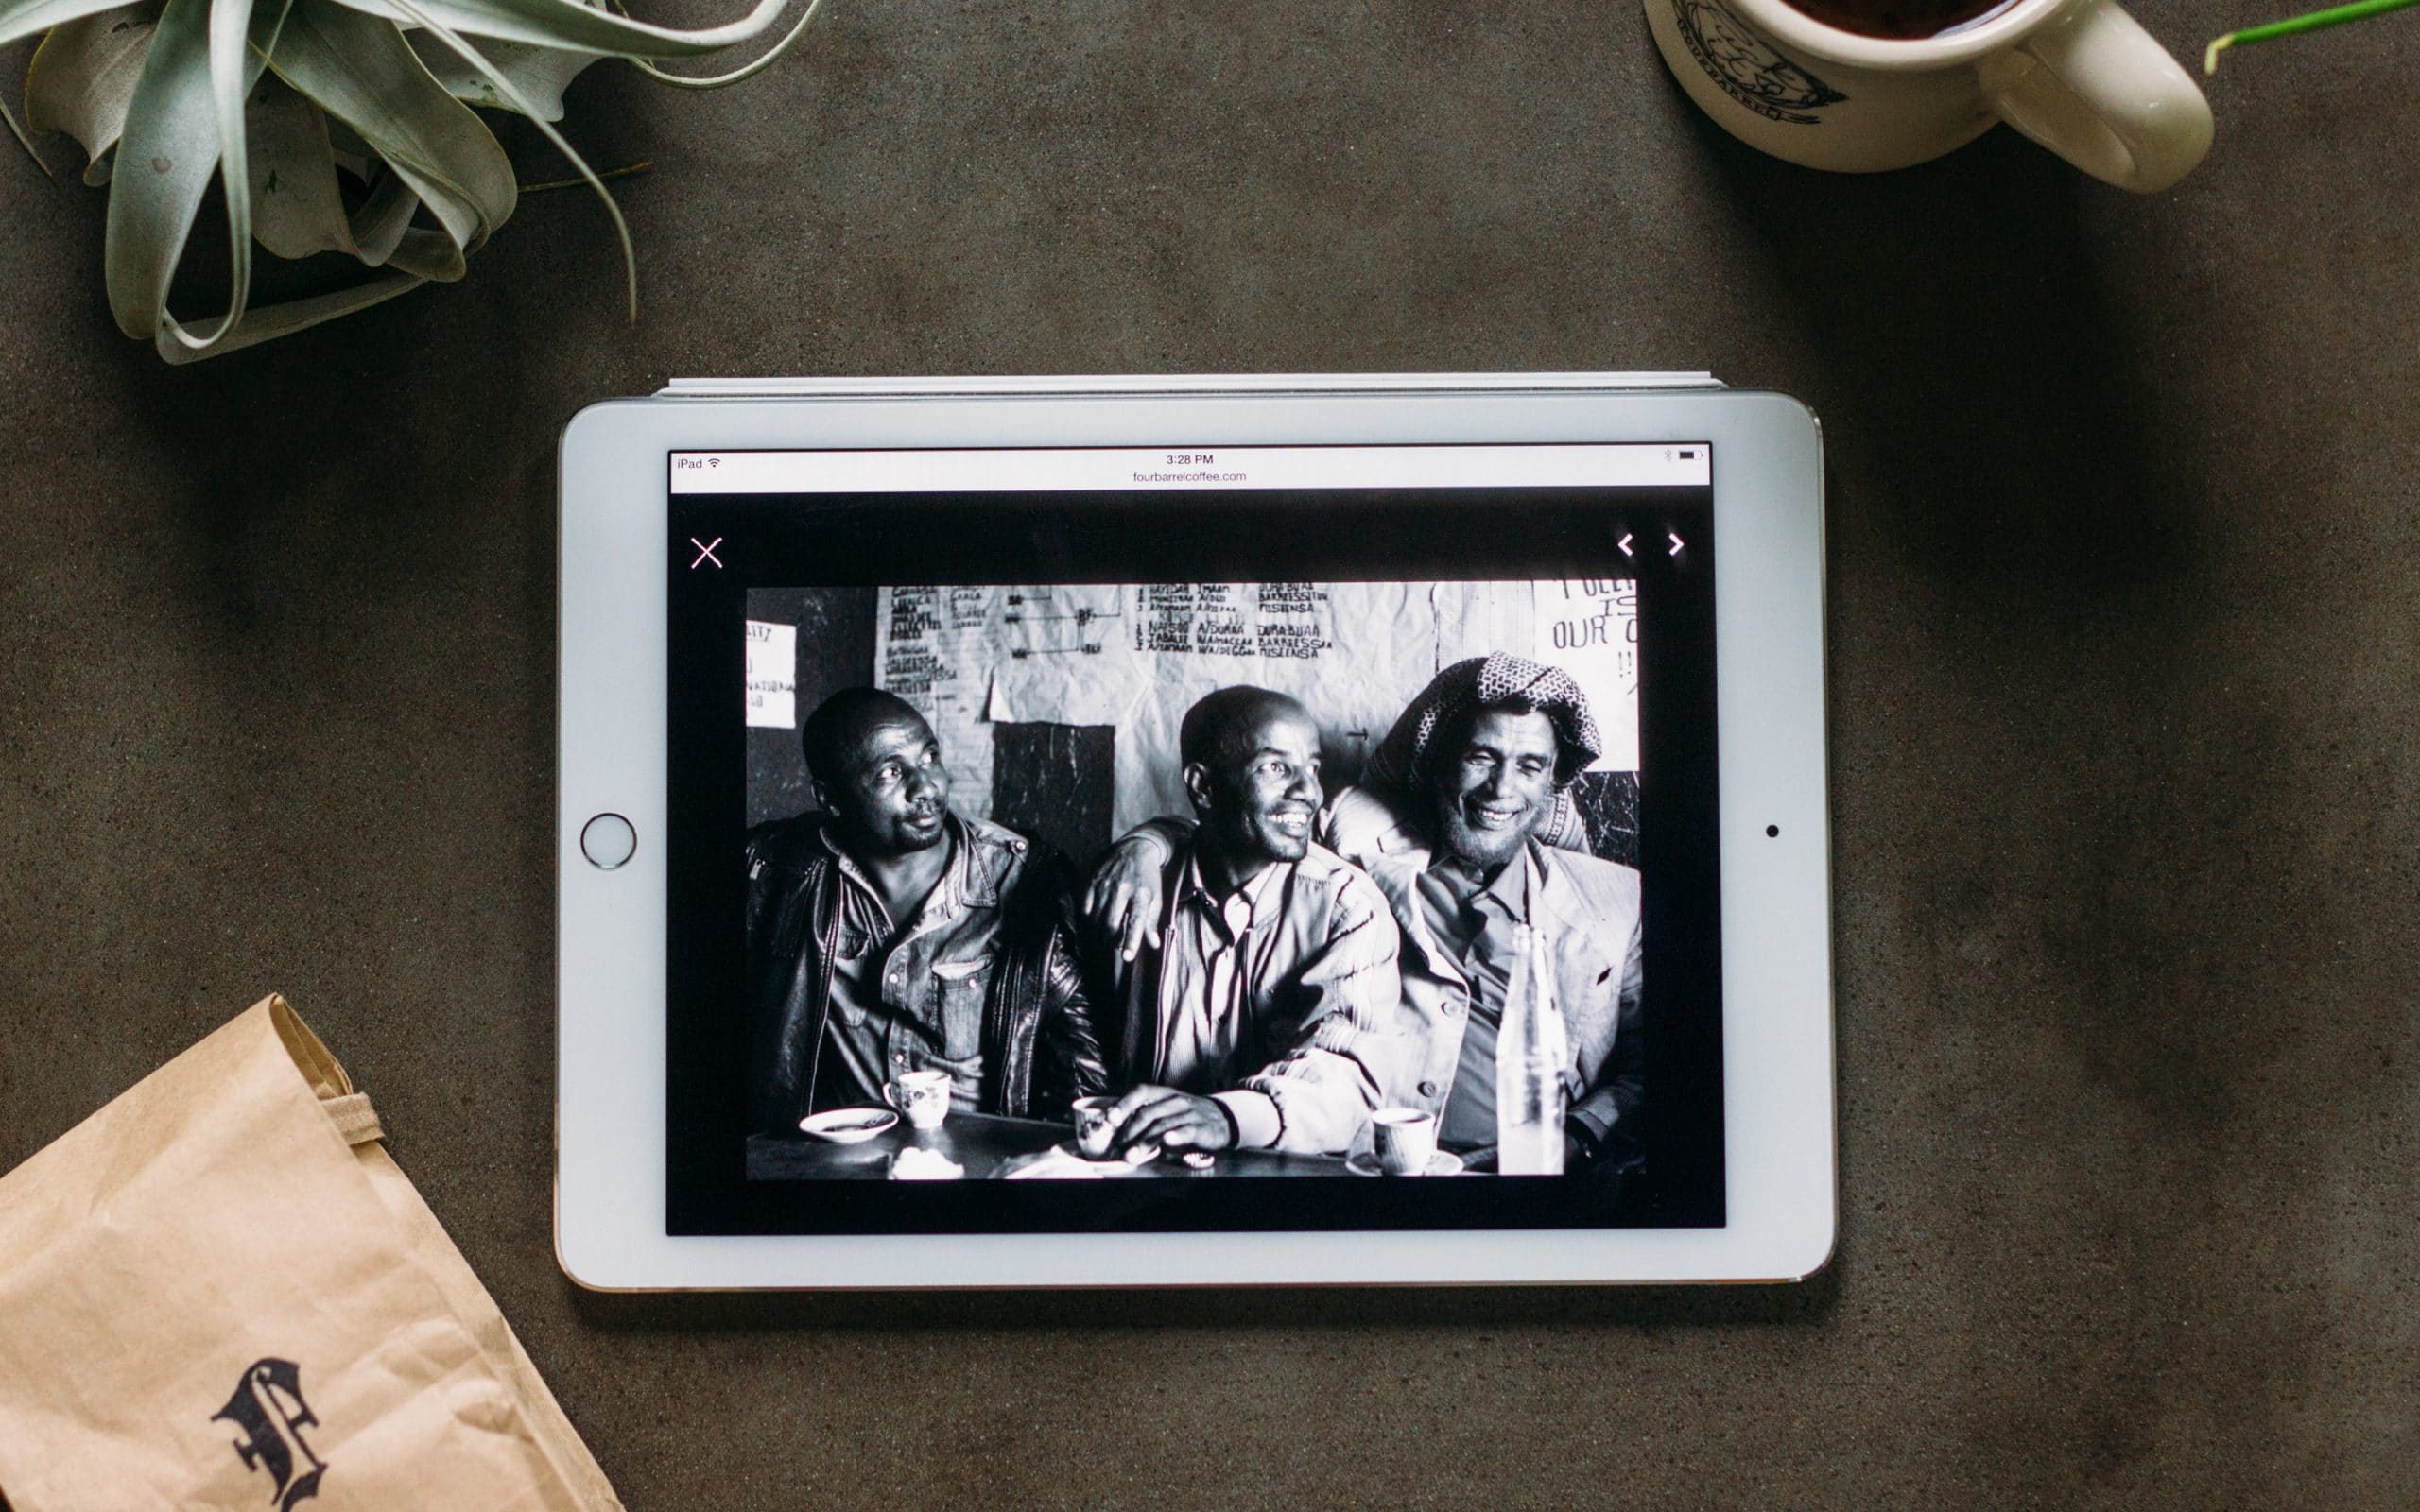 Four Barrel Coffee source photo showcases on their site, shown on iPad